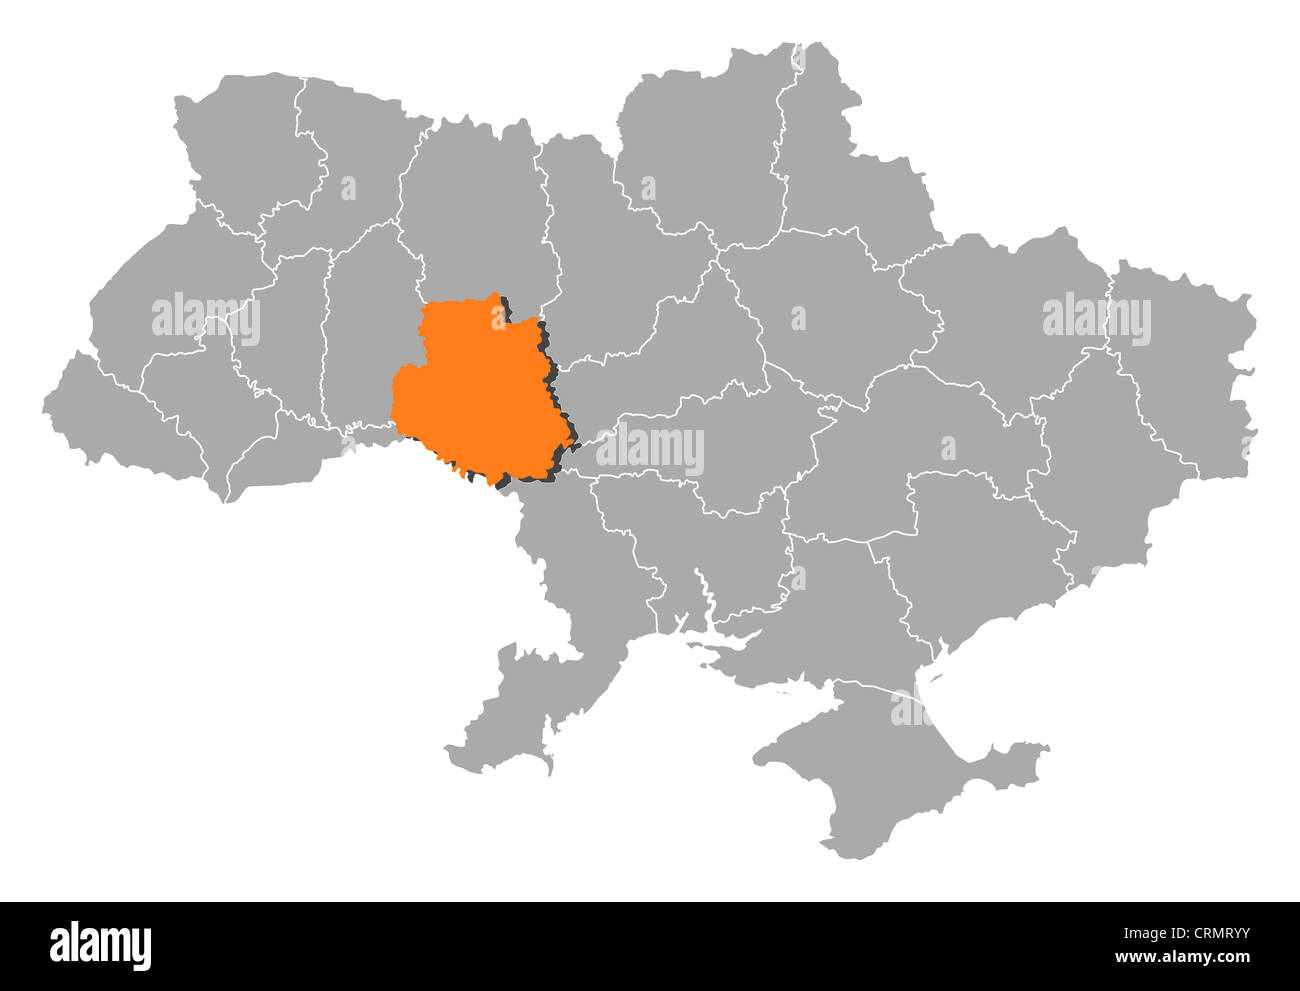 Political map of Ukraine with the several oblasts where Vinnytsia is highlighted. Stock Photo